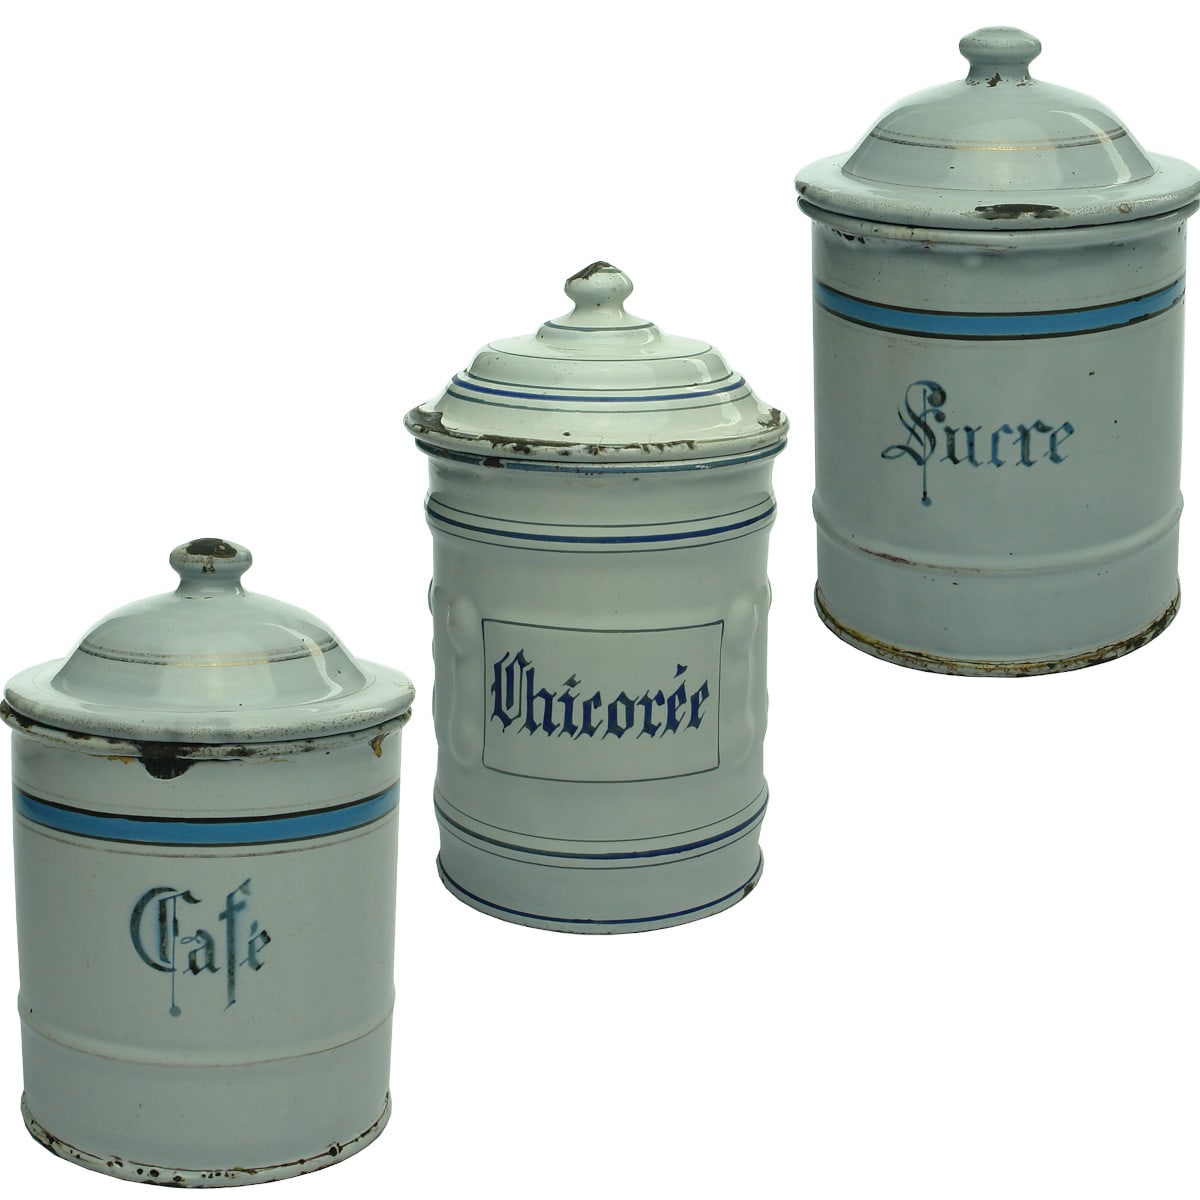 Group of 3 blue & white enamel jars for Coffee, Chicory & Sugar (Cafe, Chicoree & Sucre).